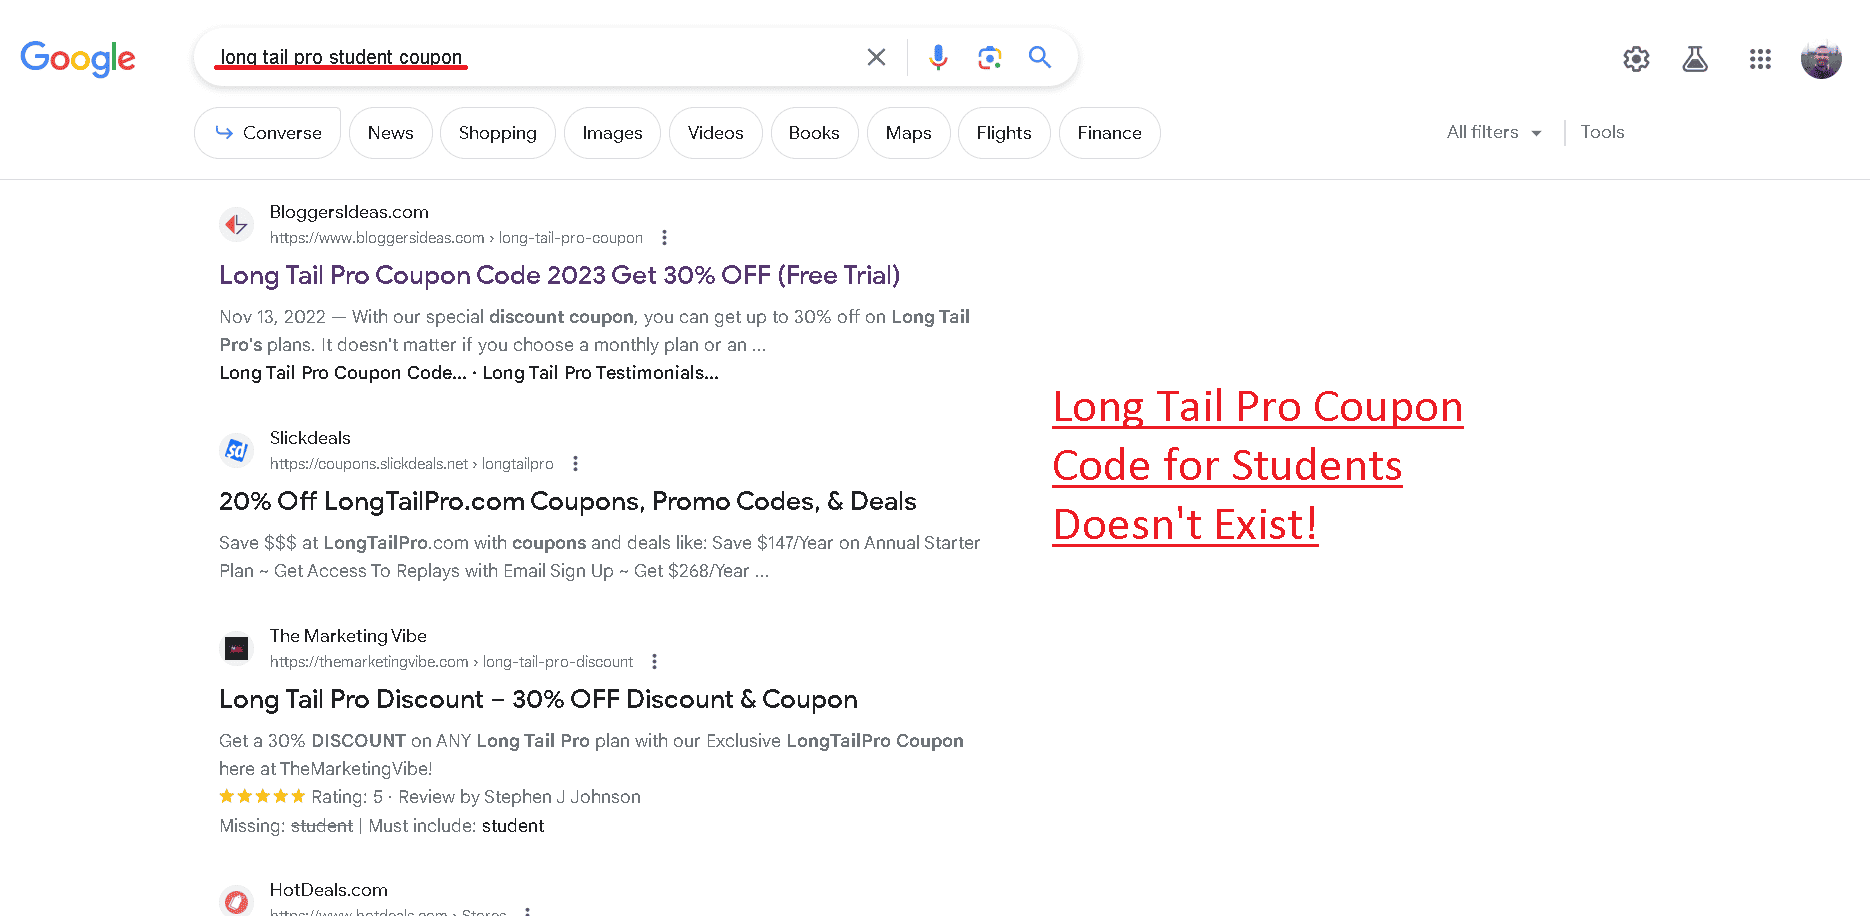 Long Tail Pro student coupon doesn't exist